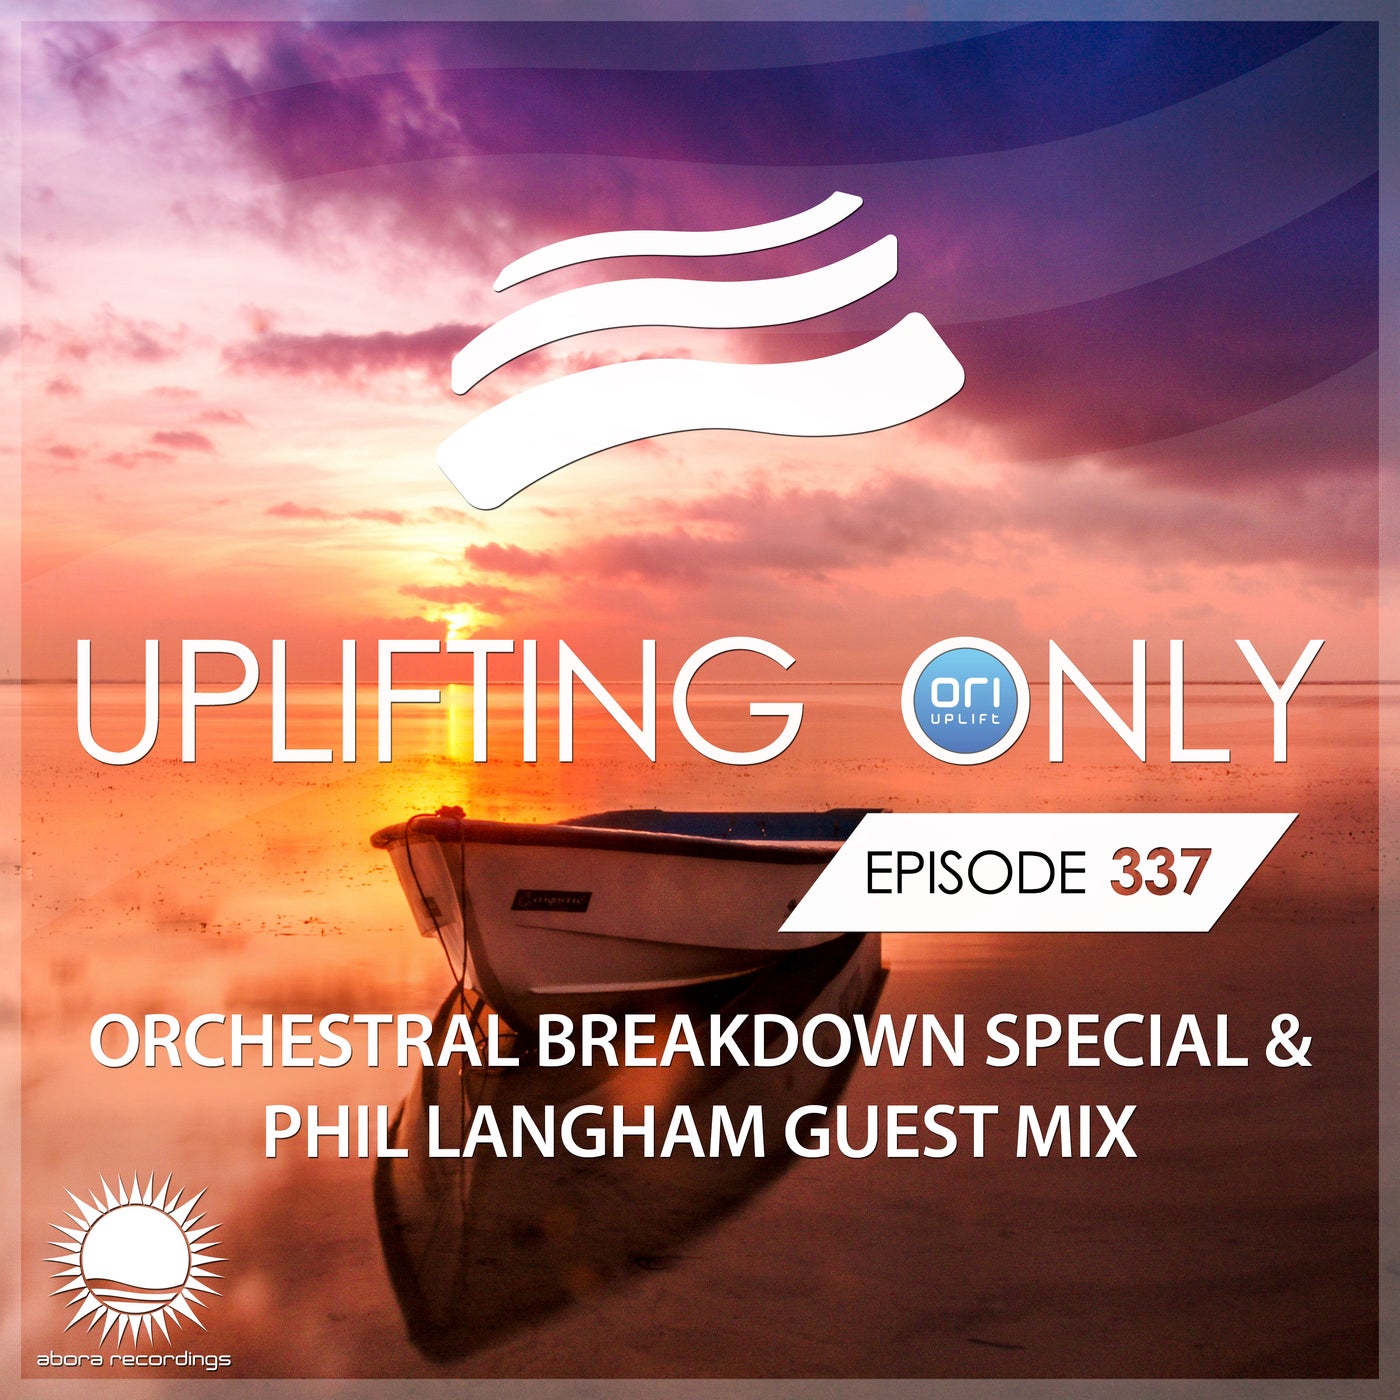 Uplifting Only Episode 337 - Orchestral Breakdown Special (incl. Phil Langham Guestmix)